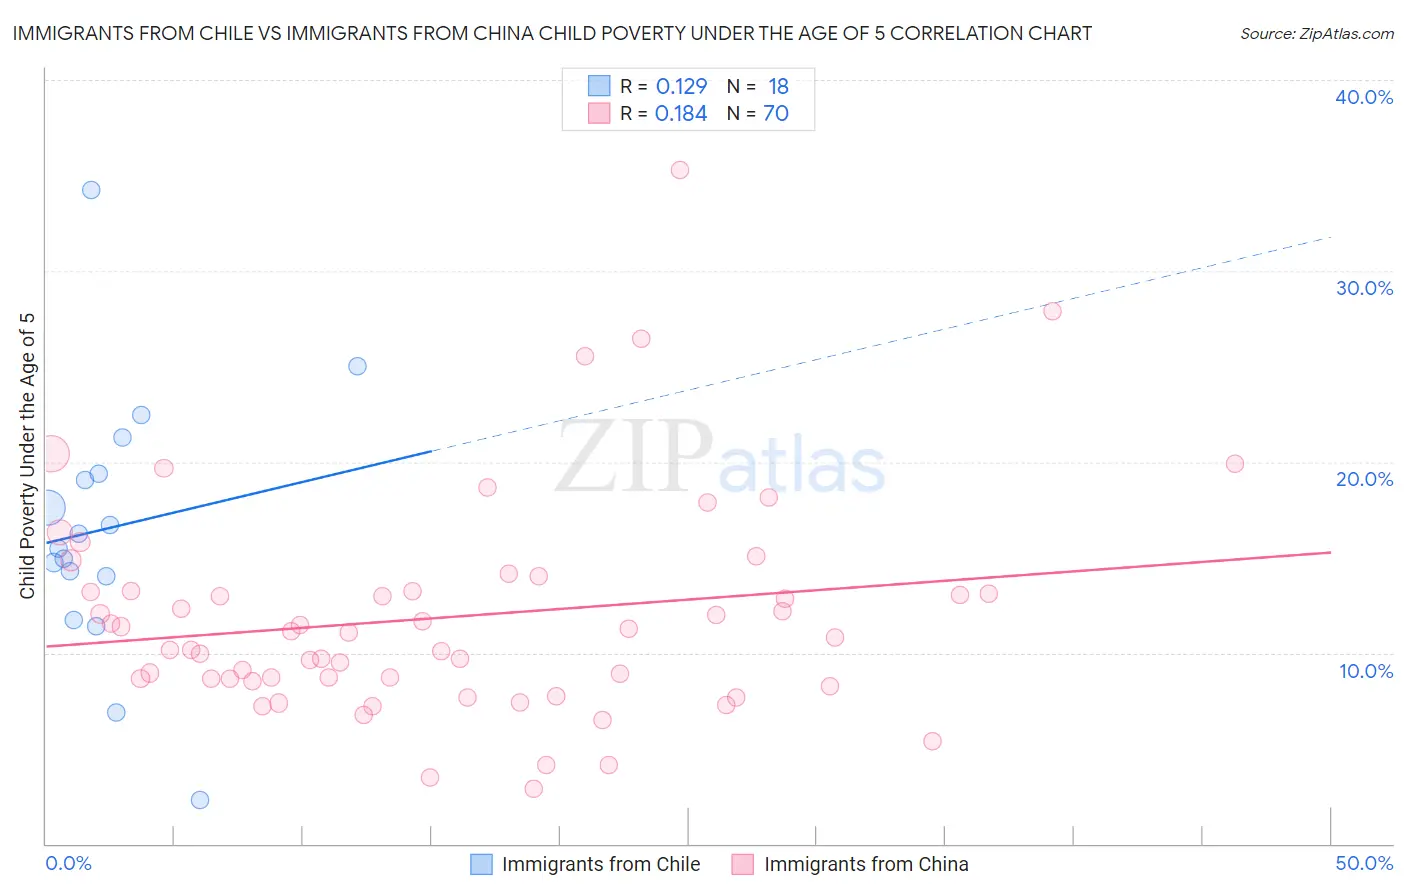 Immigrants from Chile vs Immigrants from China Child Poverty Under the Age of 5